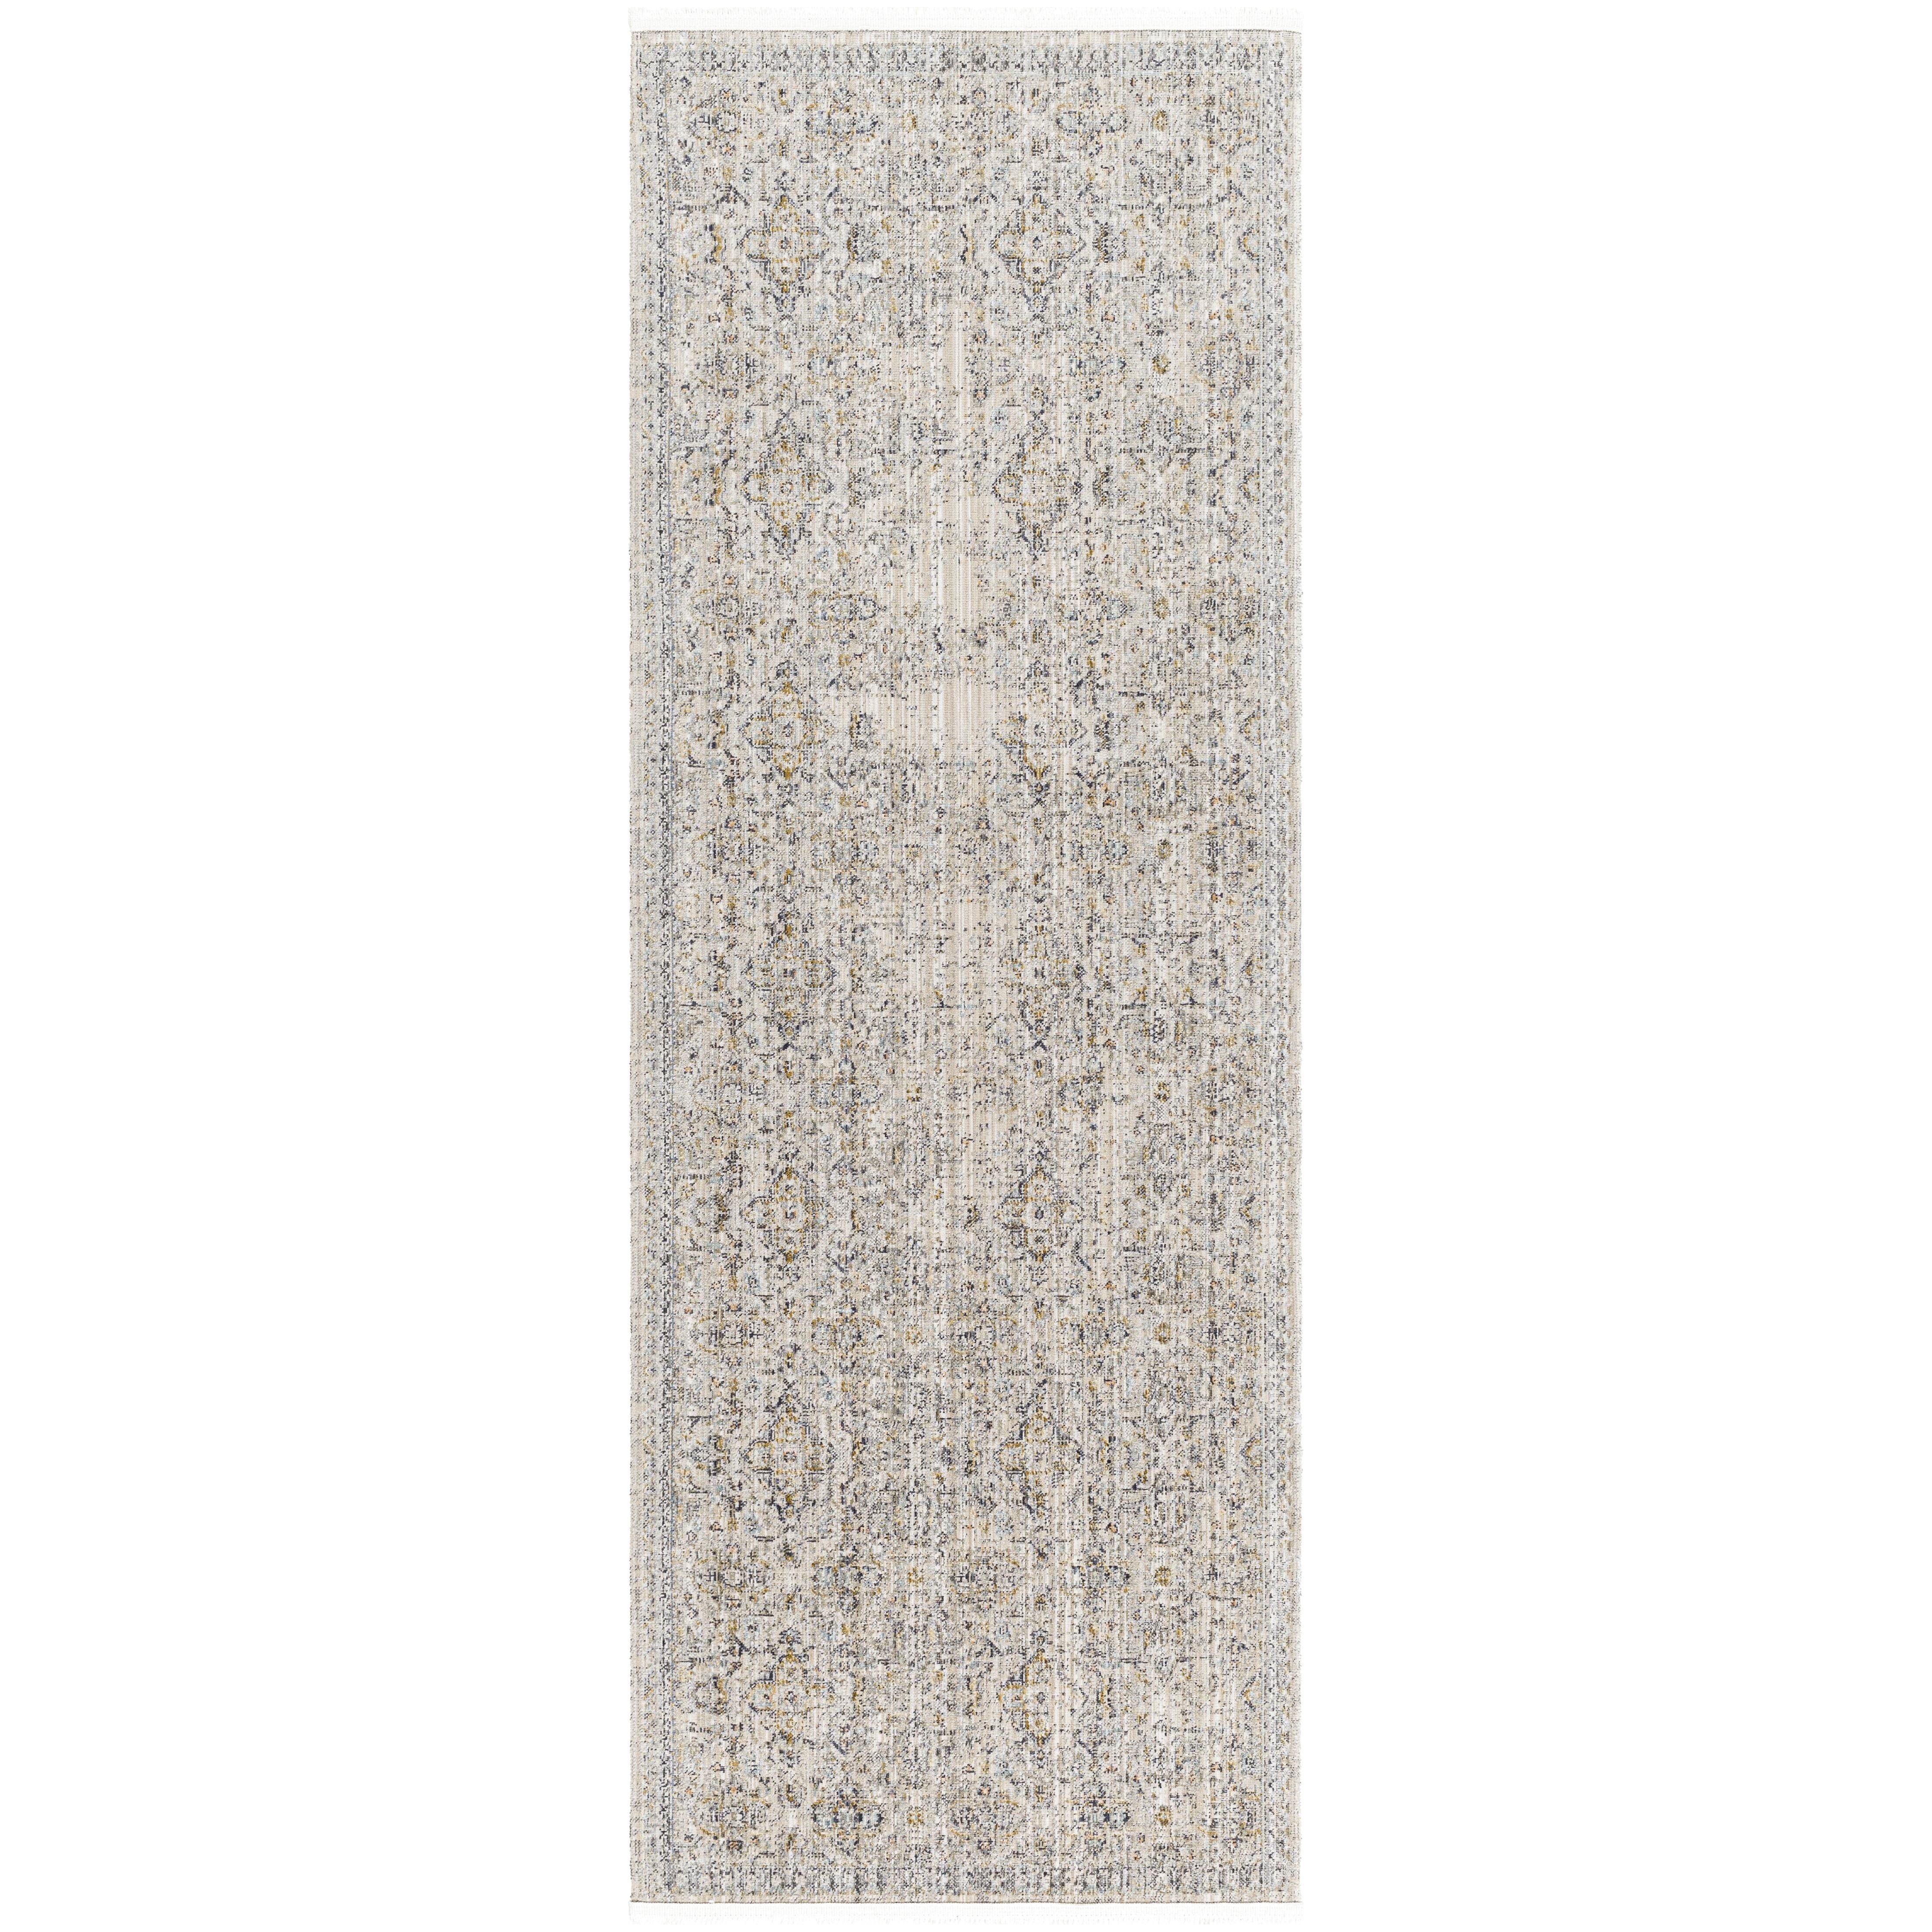 Introduce your home to the timeless beauty of the Margaret area rug! This special piece from our Becki Owens x Surya collaboration is the perfect way to add a vintage-inspired touch to any space. Amethyst Home provides interior design, new home construction design consulting, vintage area rugs, and lighting in the Seattle metro area.